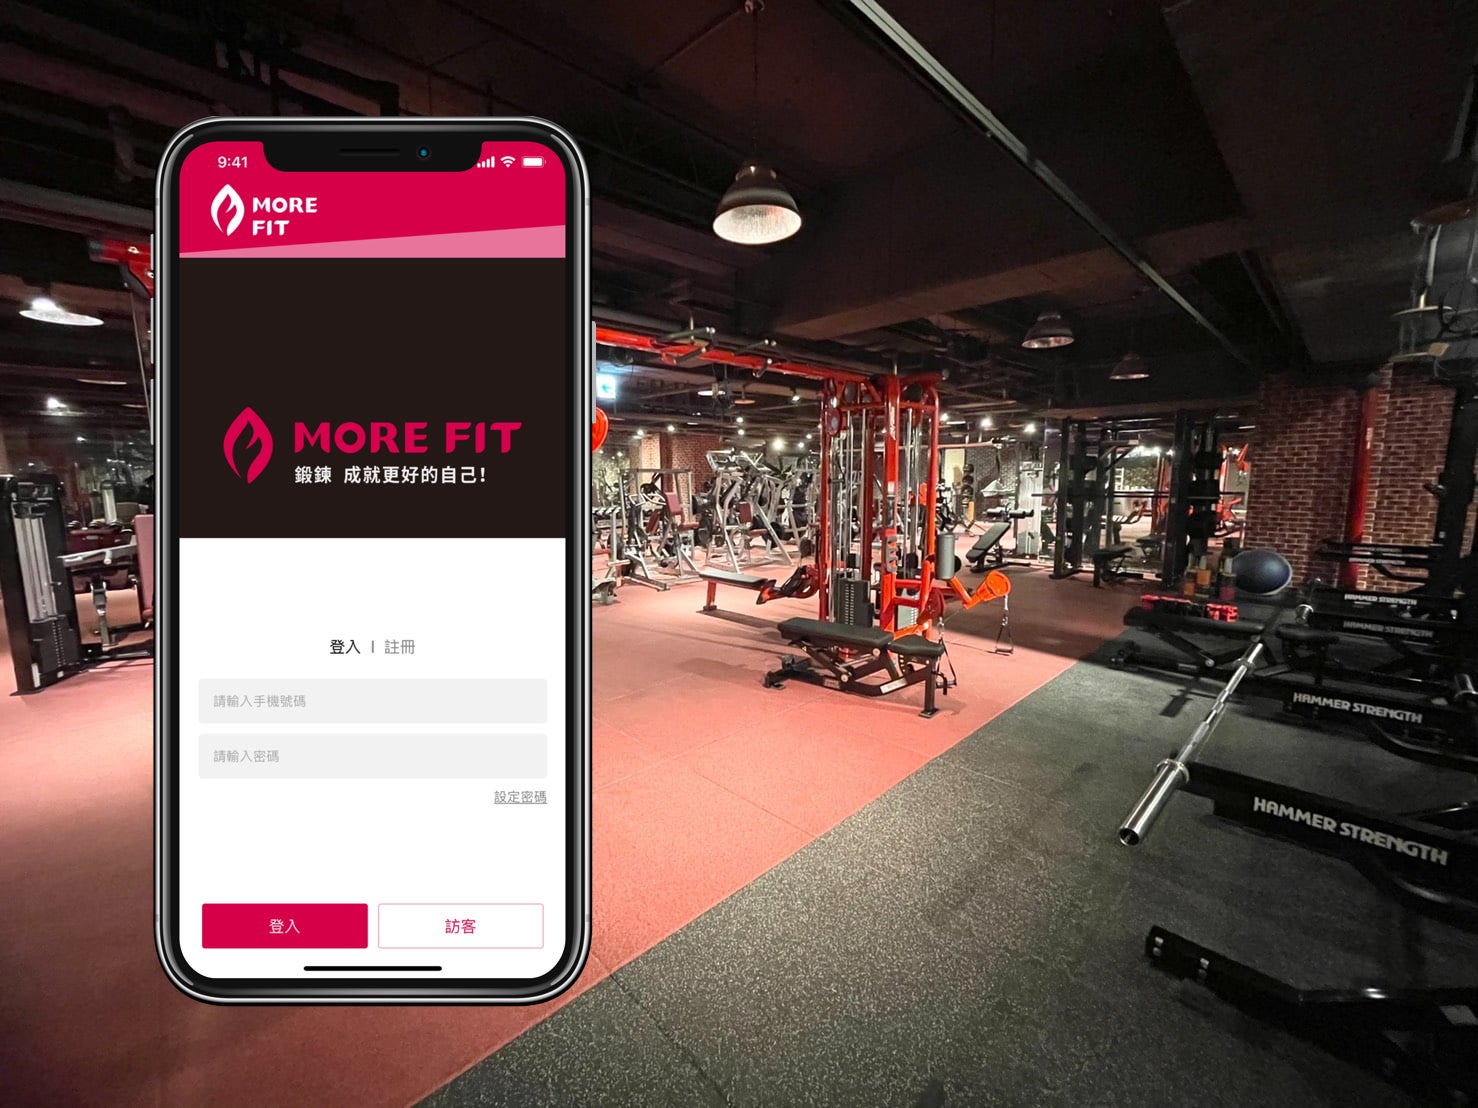 [MORE FIT Review] A perfect fitness environment that spoils fitness enthusiasts. It can be used across 4 major branches without increasing the price8